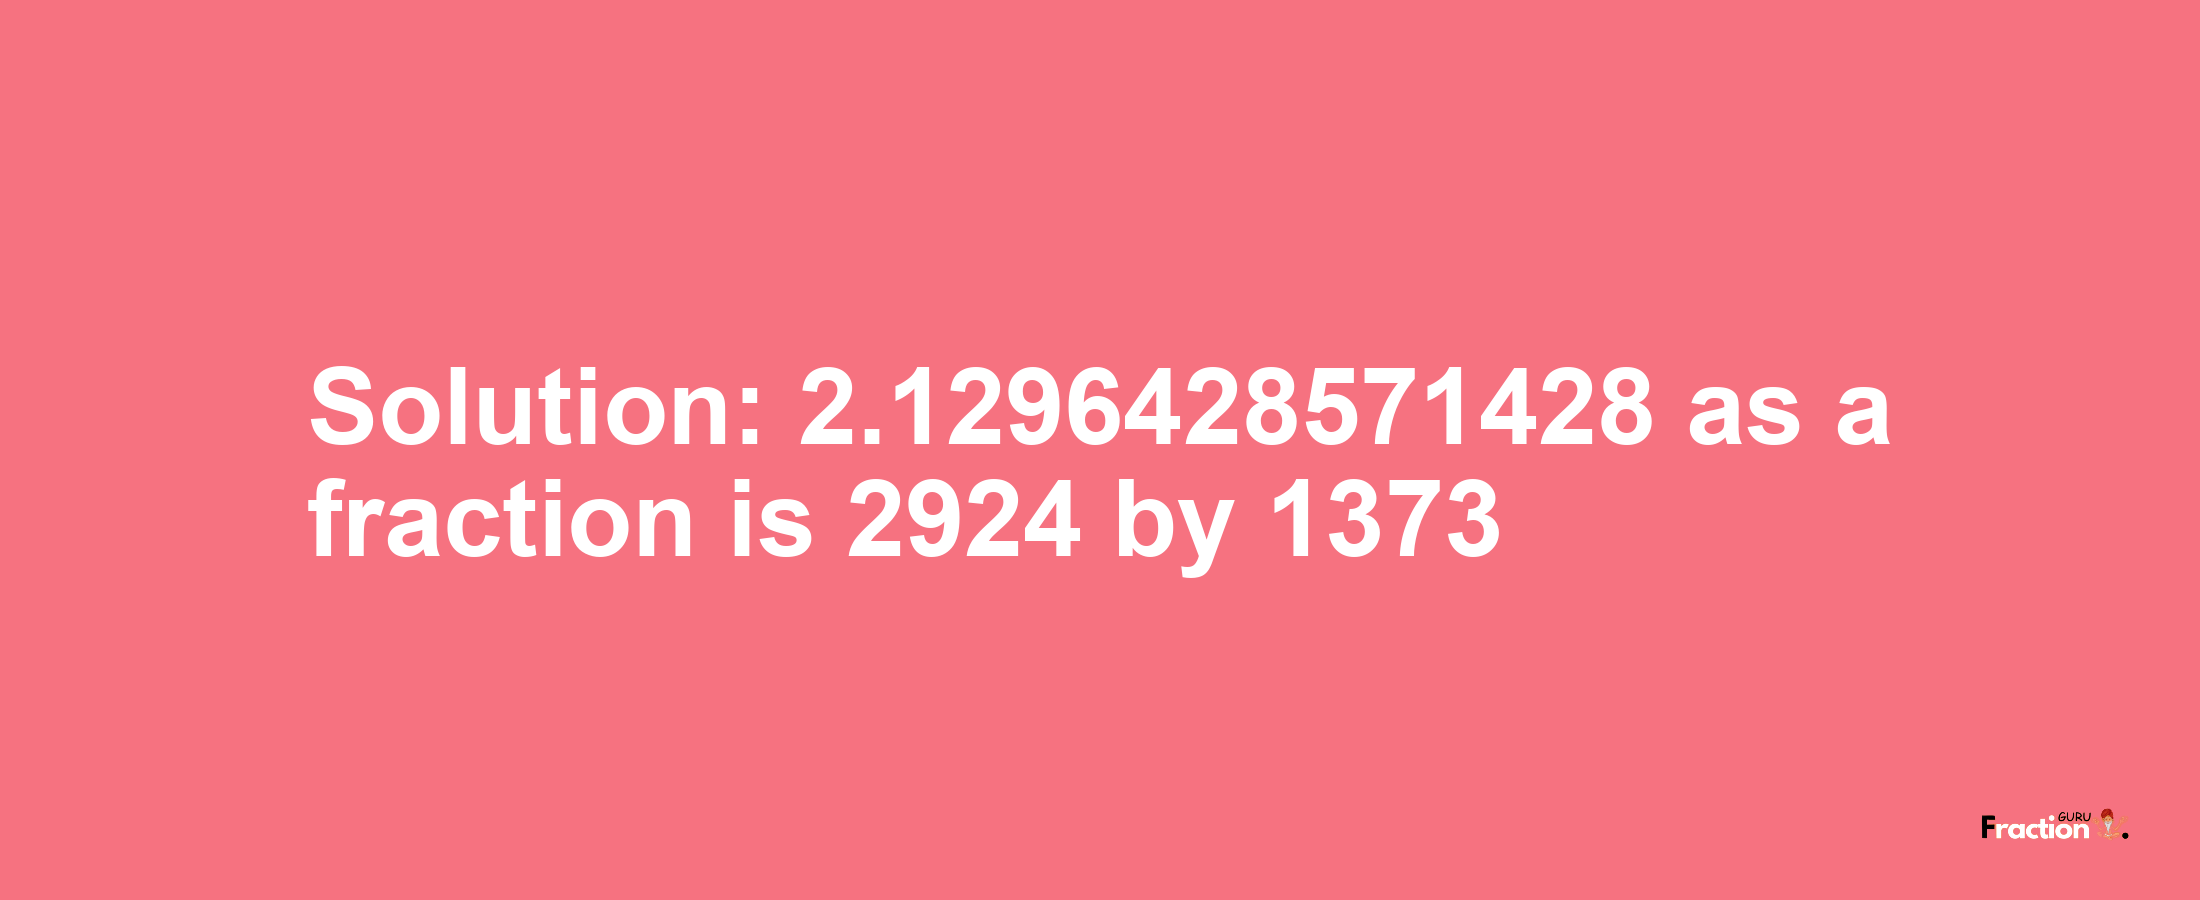 Solution:2.1296428571428 as a fraction is 2924/1373